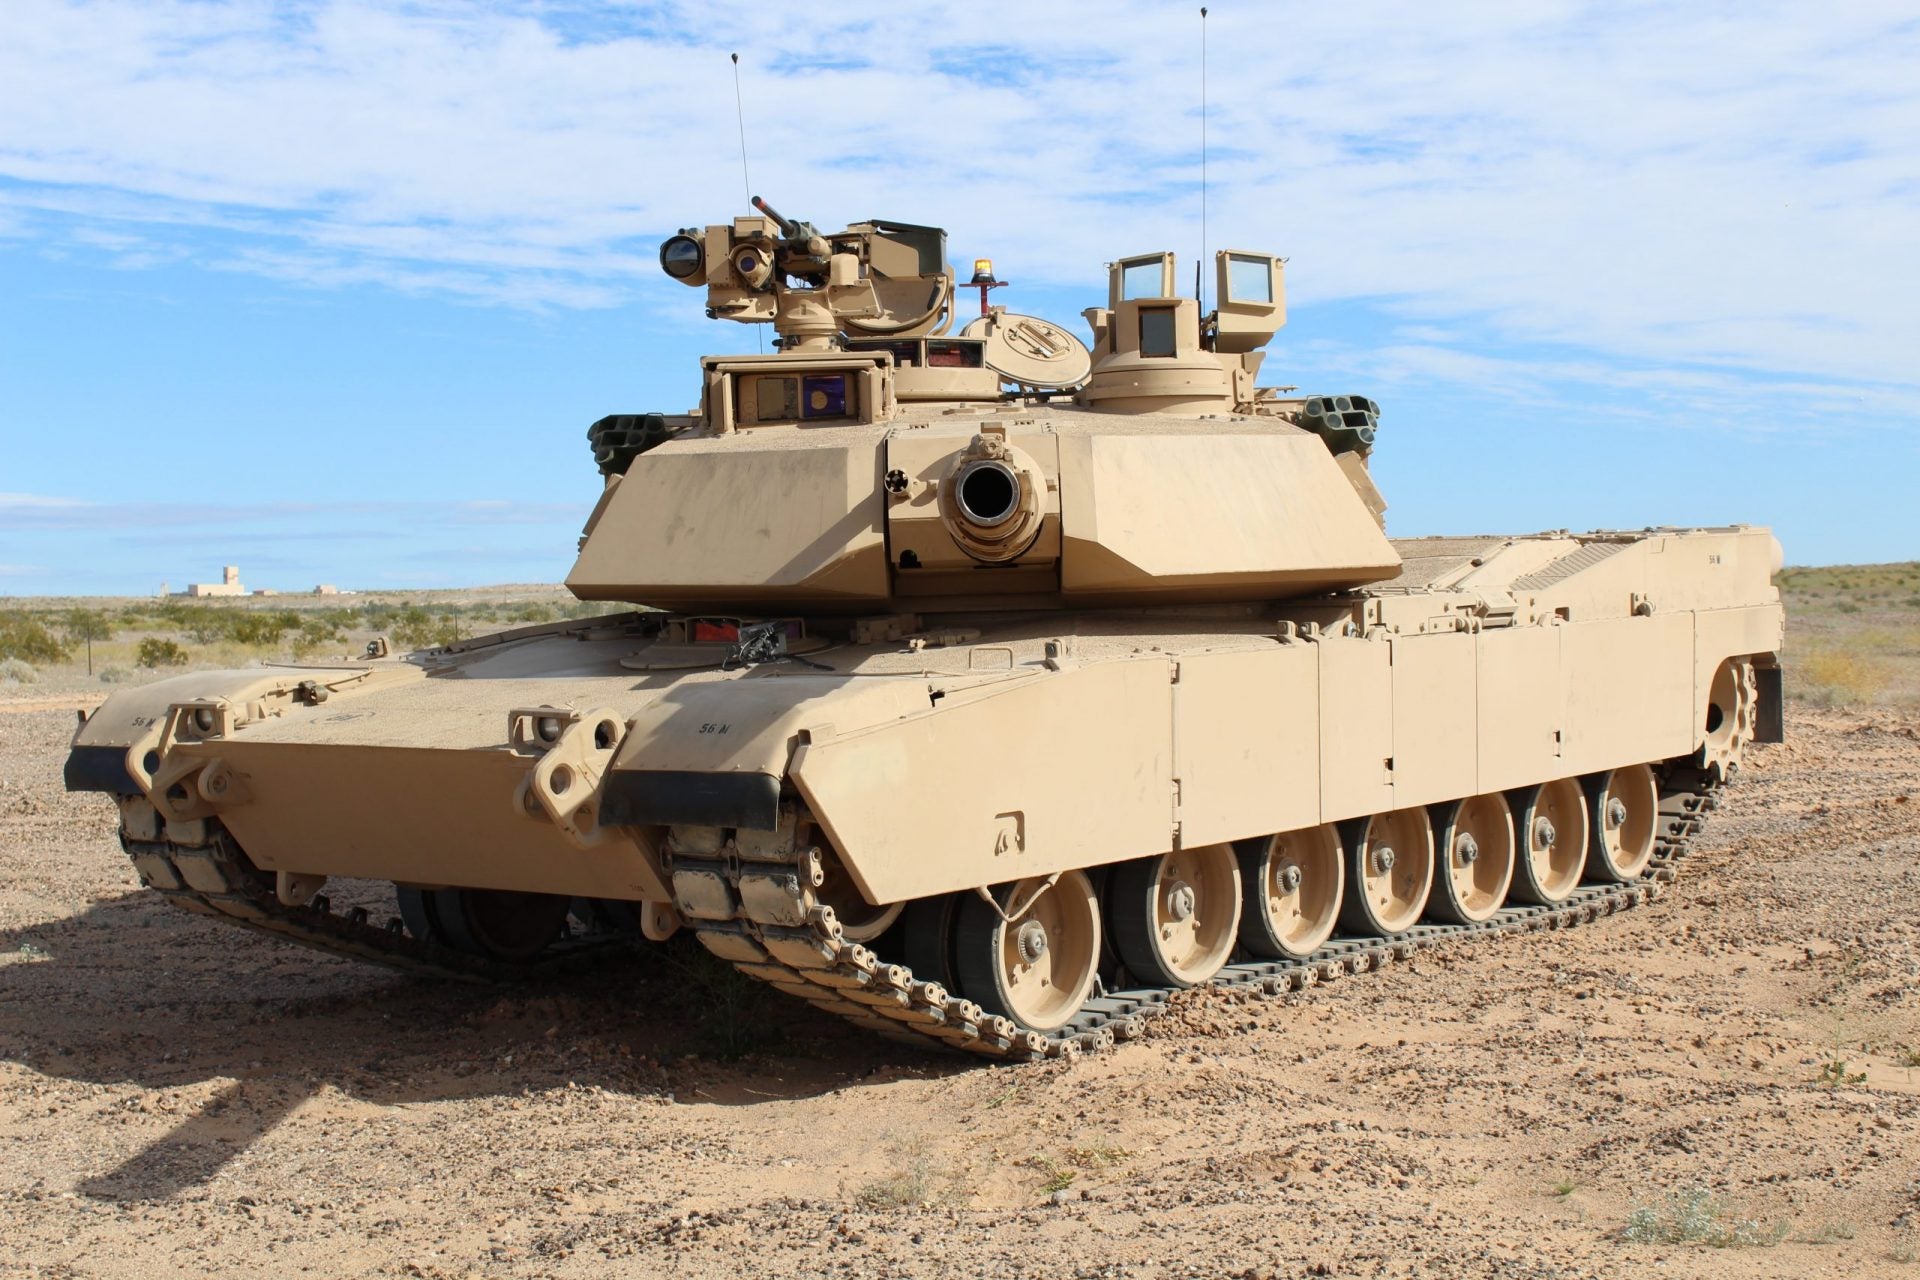 who builds tanks for the us military